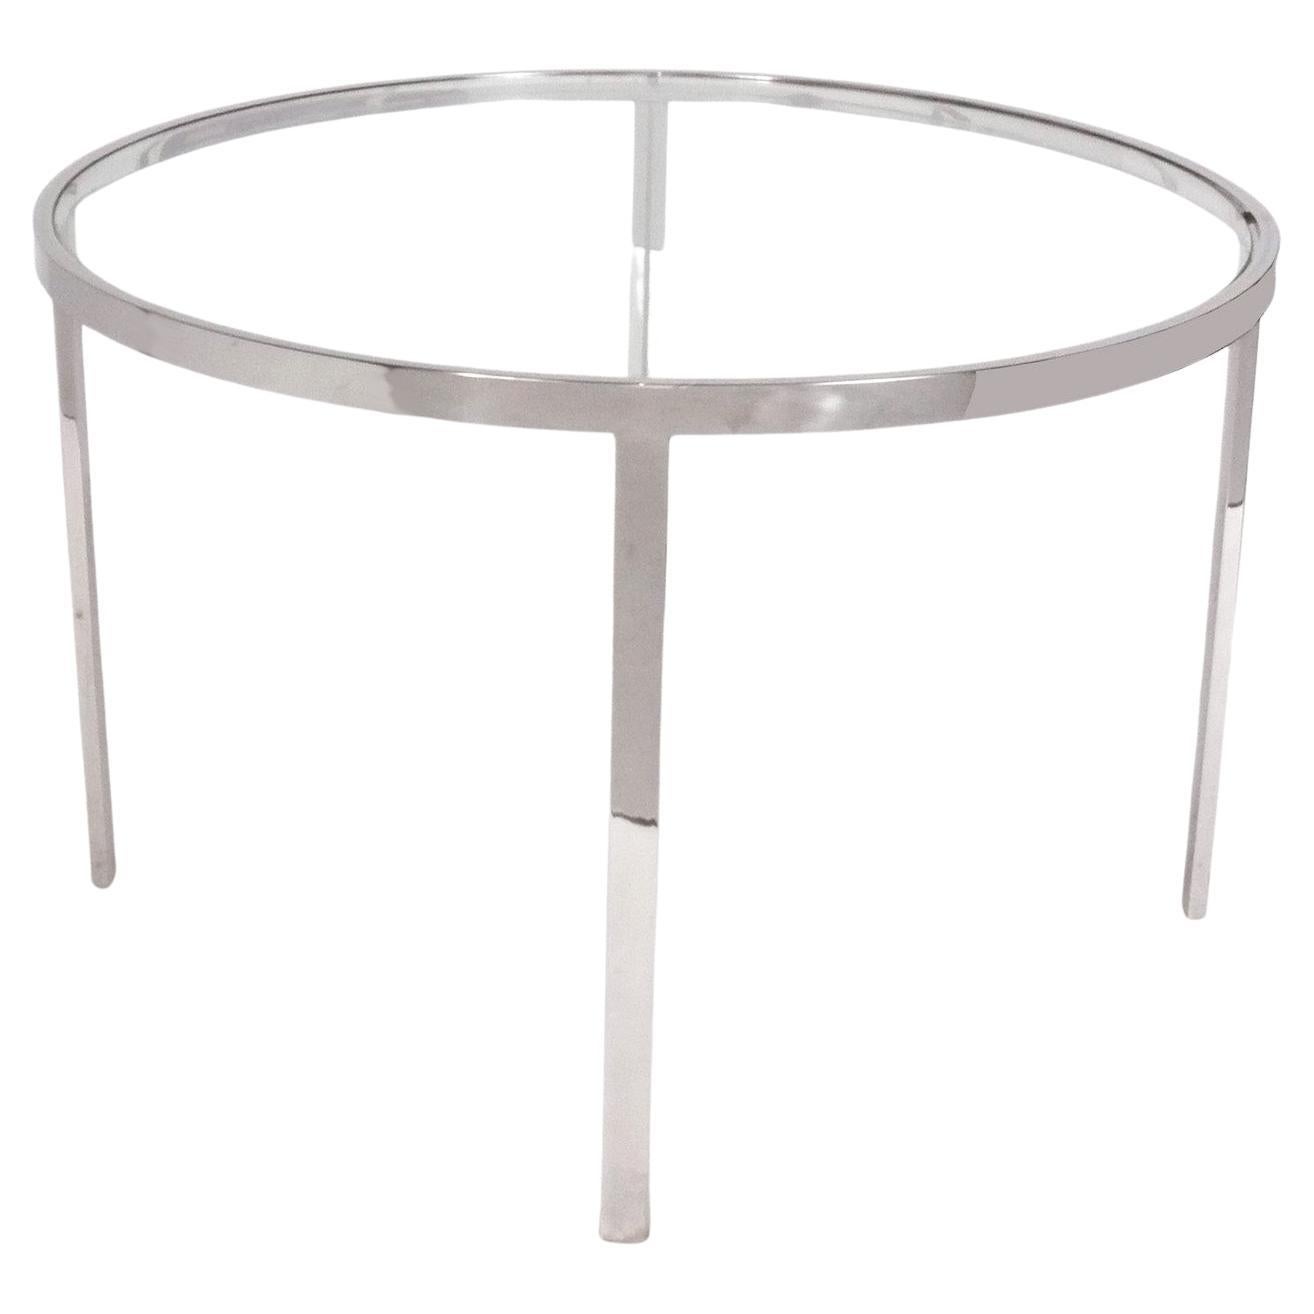 Clean Lined Chrome Dining Table by Milo Baughman for DIA 42" Diameter